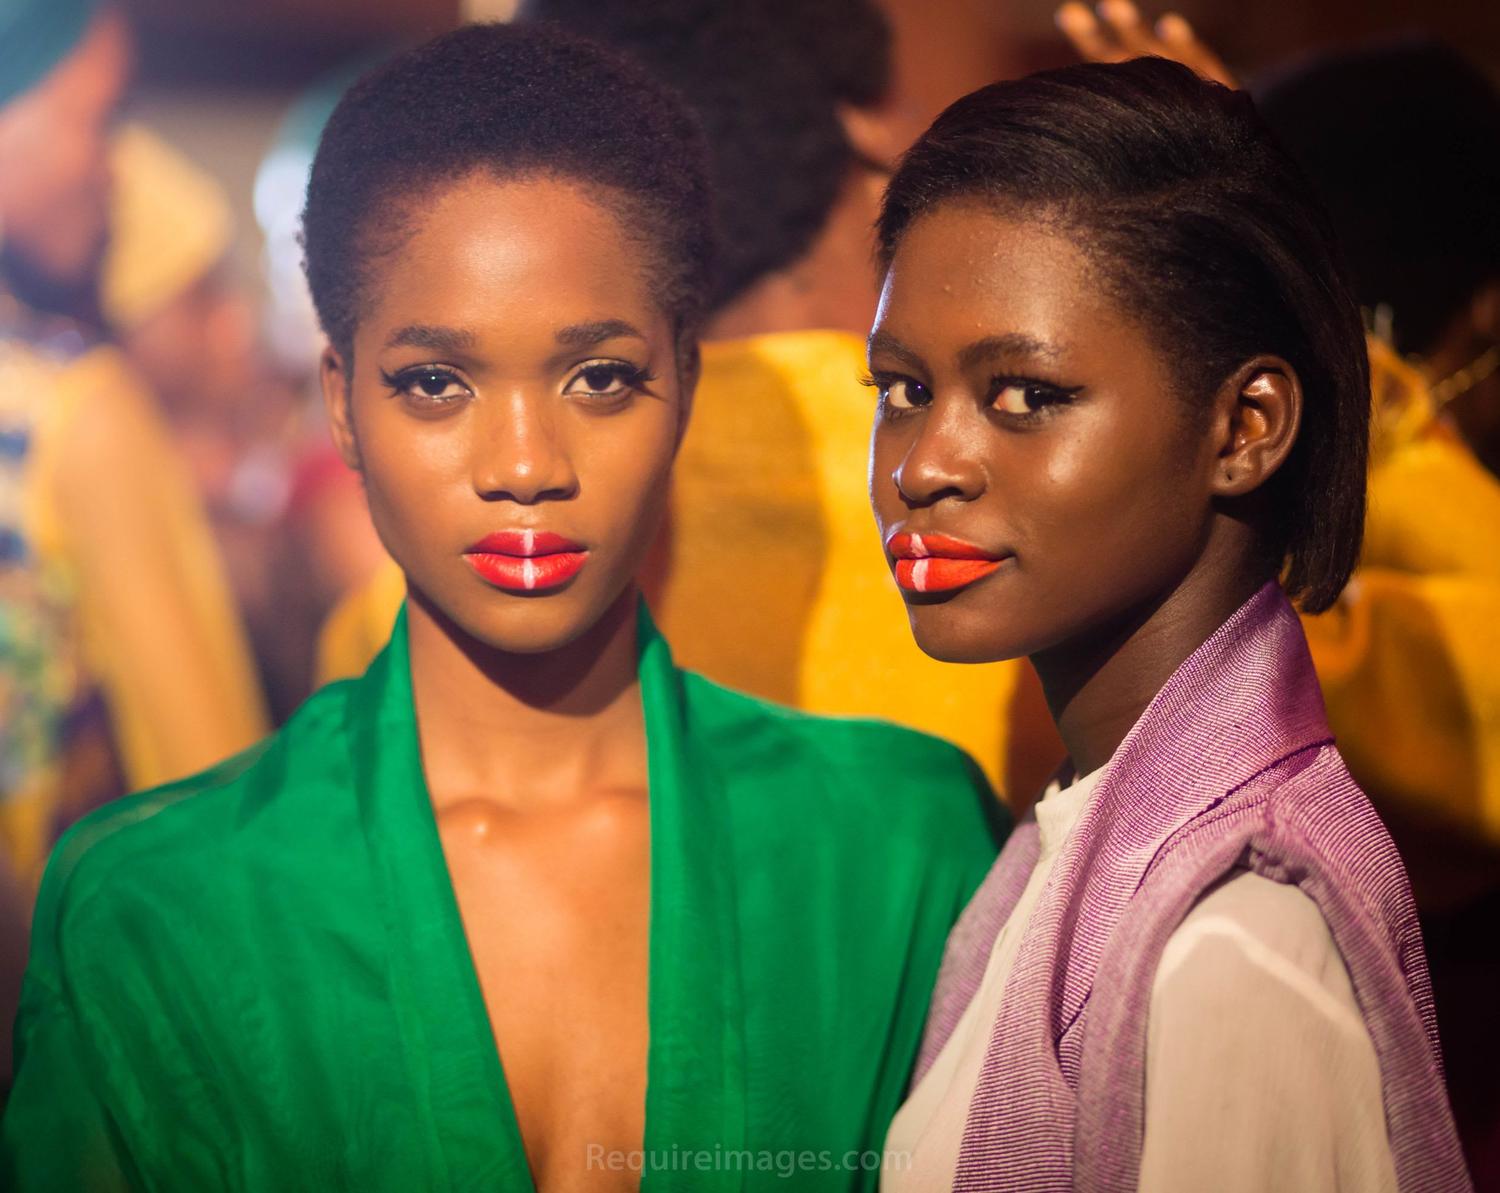 This Is How You Do Runway Beauty, According to House of Tara